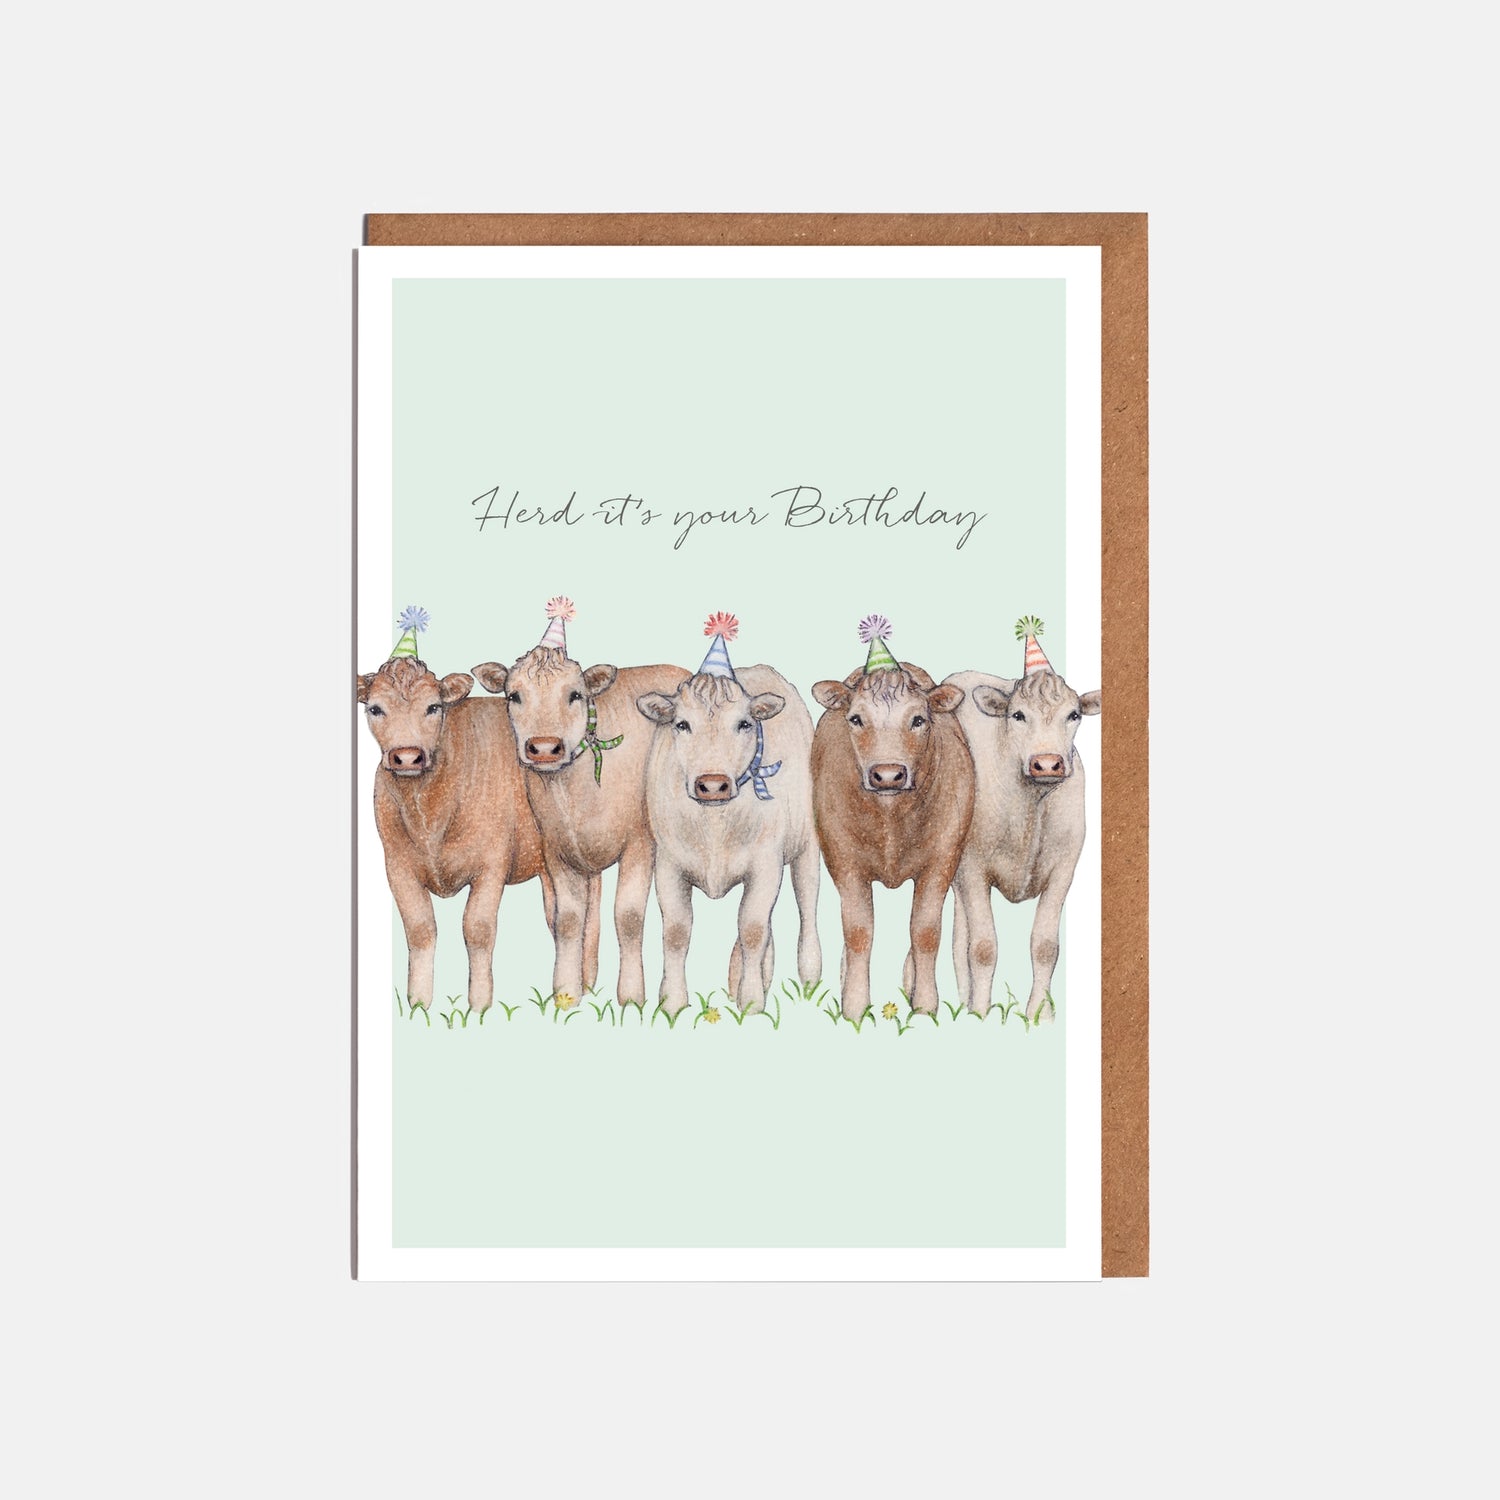 A Herd of Cows Birthday Card - &